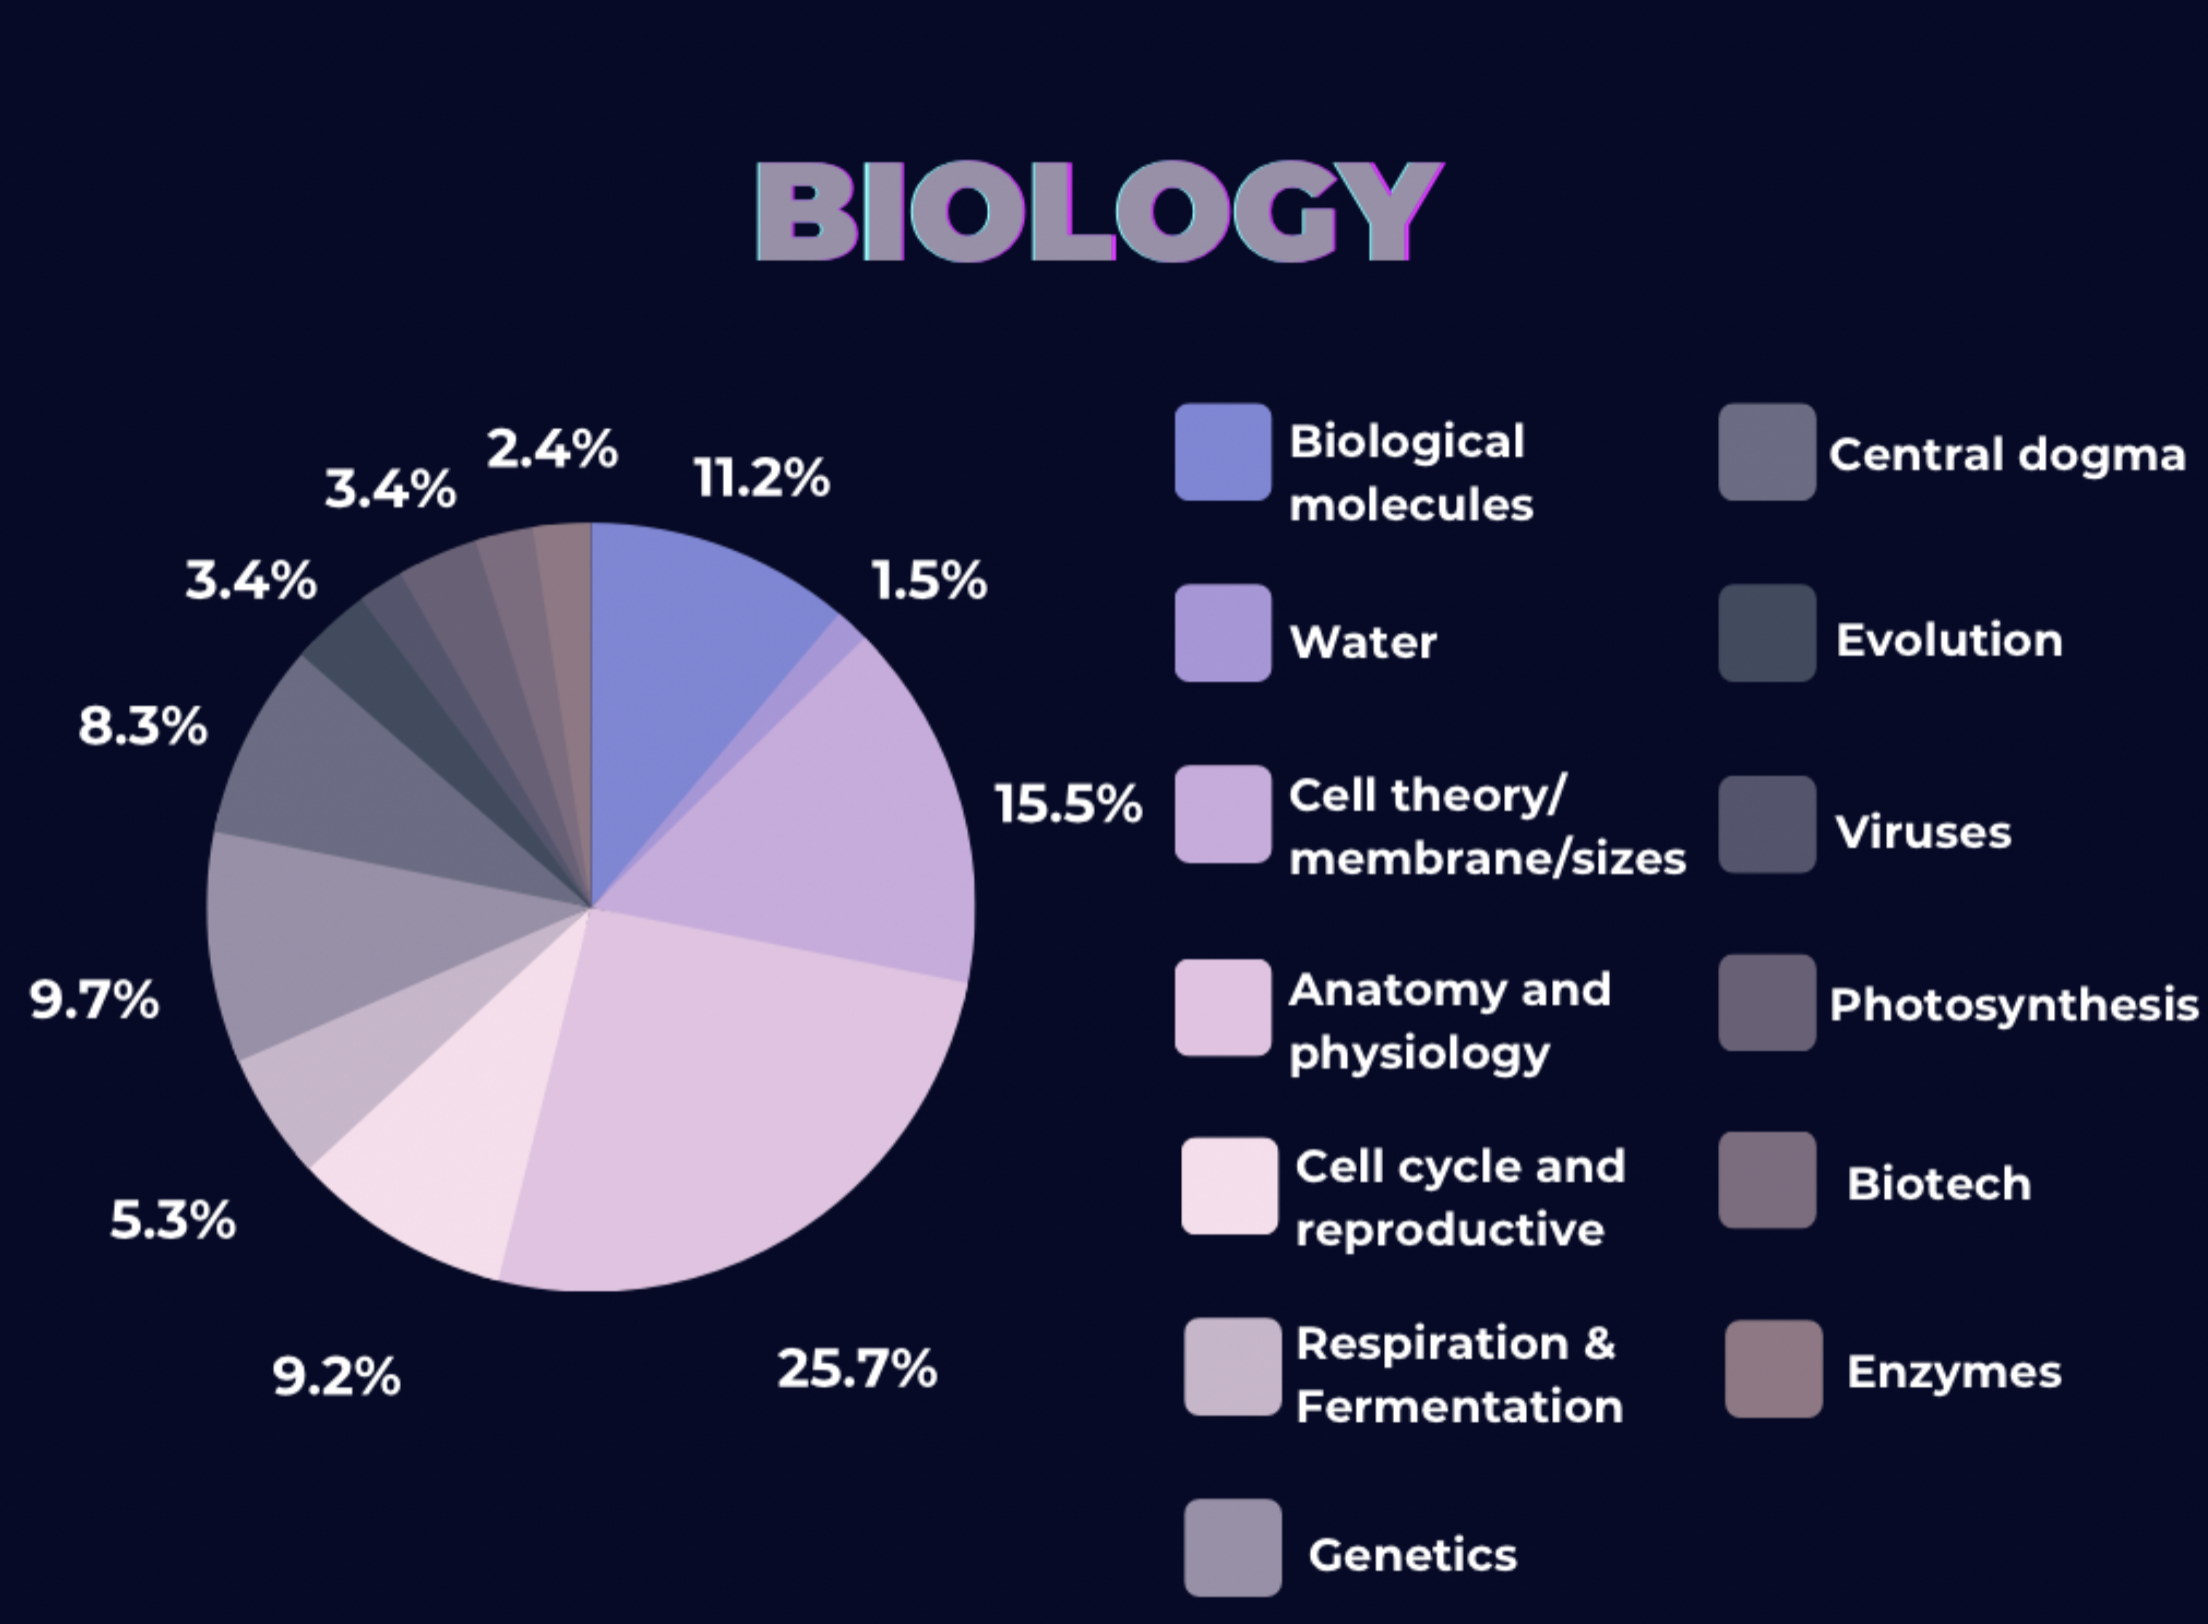 IMAT Biology section breakdown from 2011 to 2022